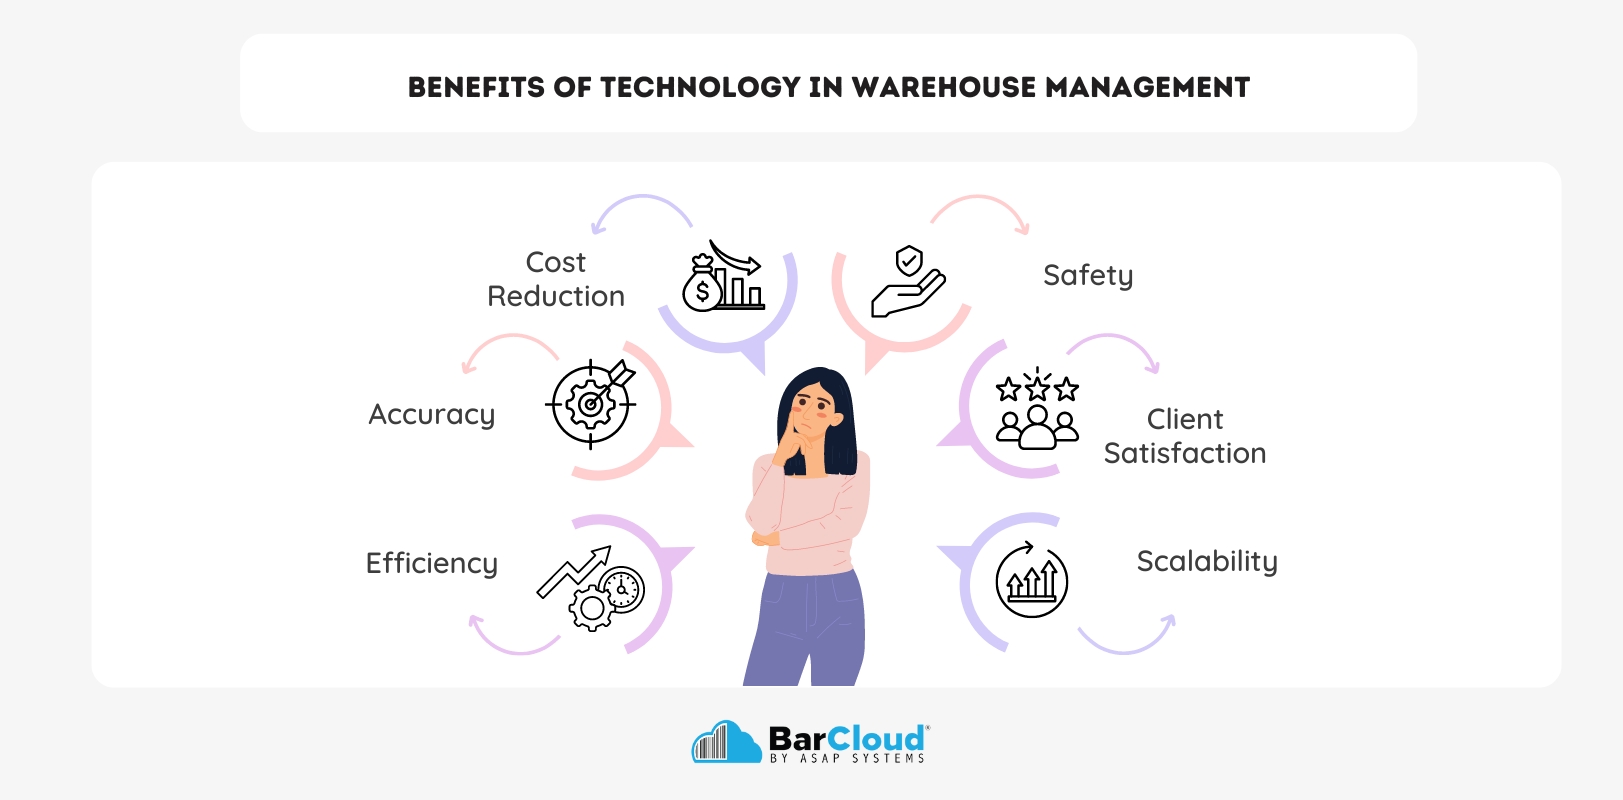 Benefits of Technology in Warehouse Management